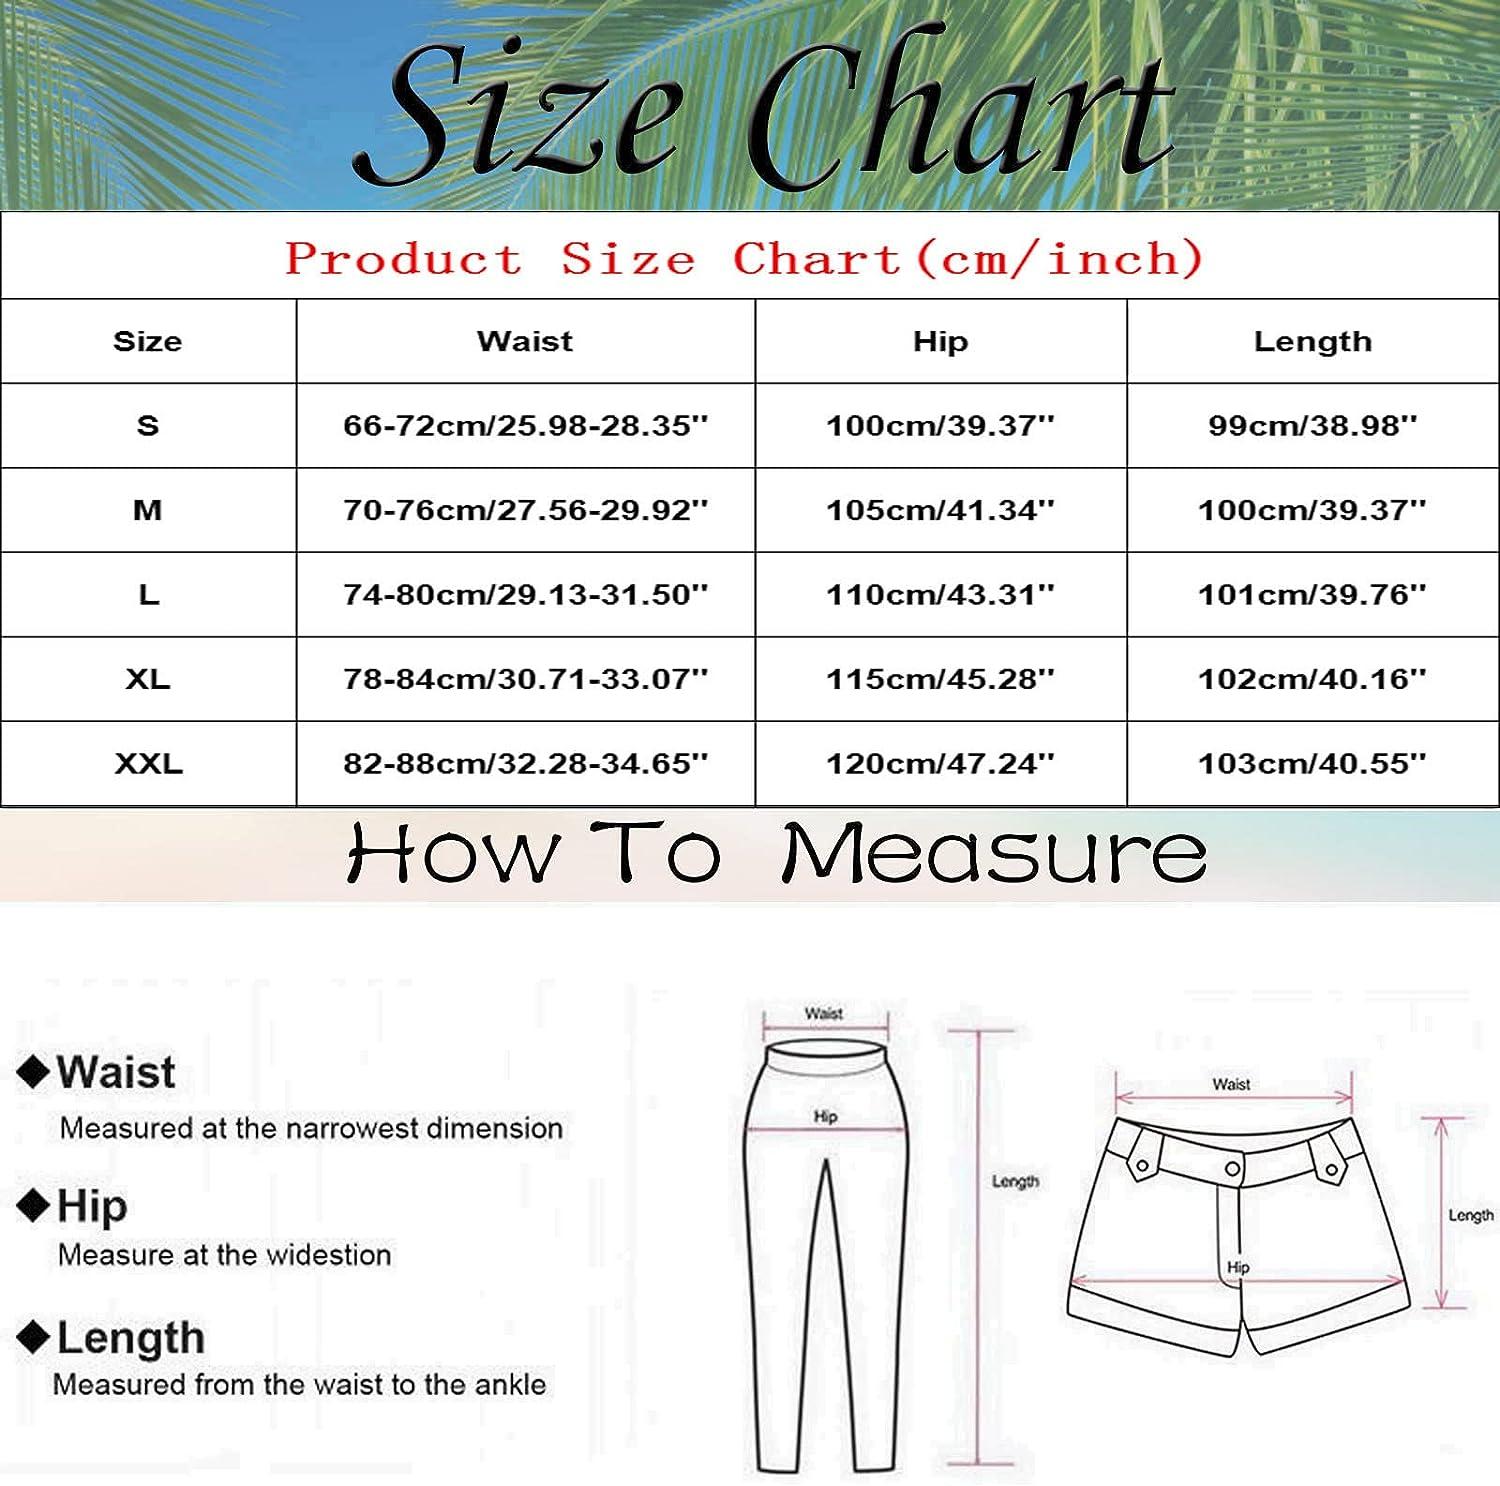 Gufesf Women's Cotton Linen Palazzo Pants Casual Wide Leg Long Trousers  with Pockets Beach Pants for